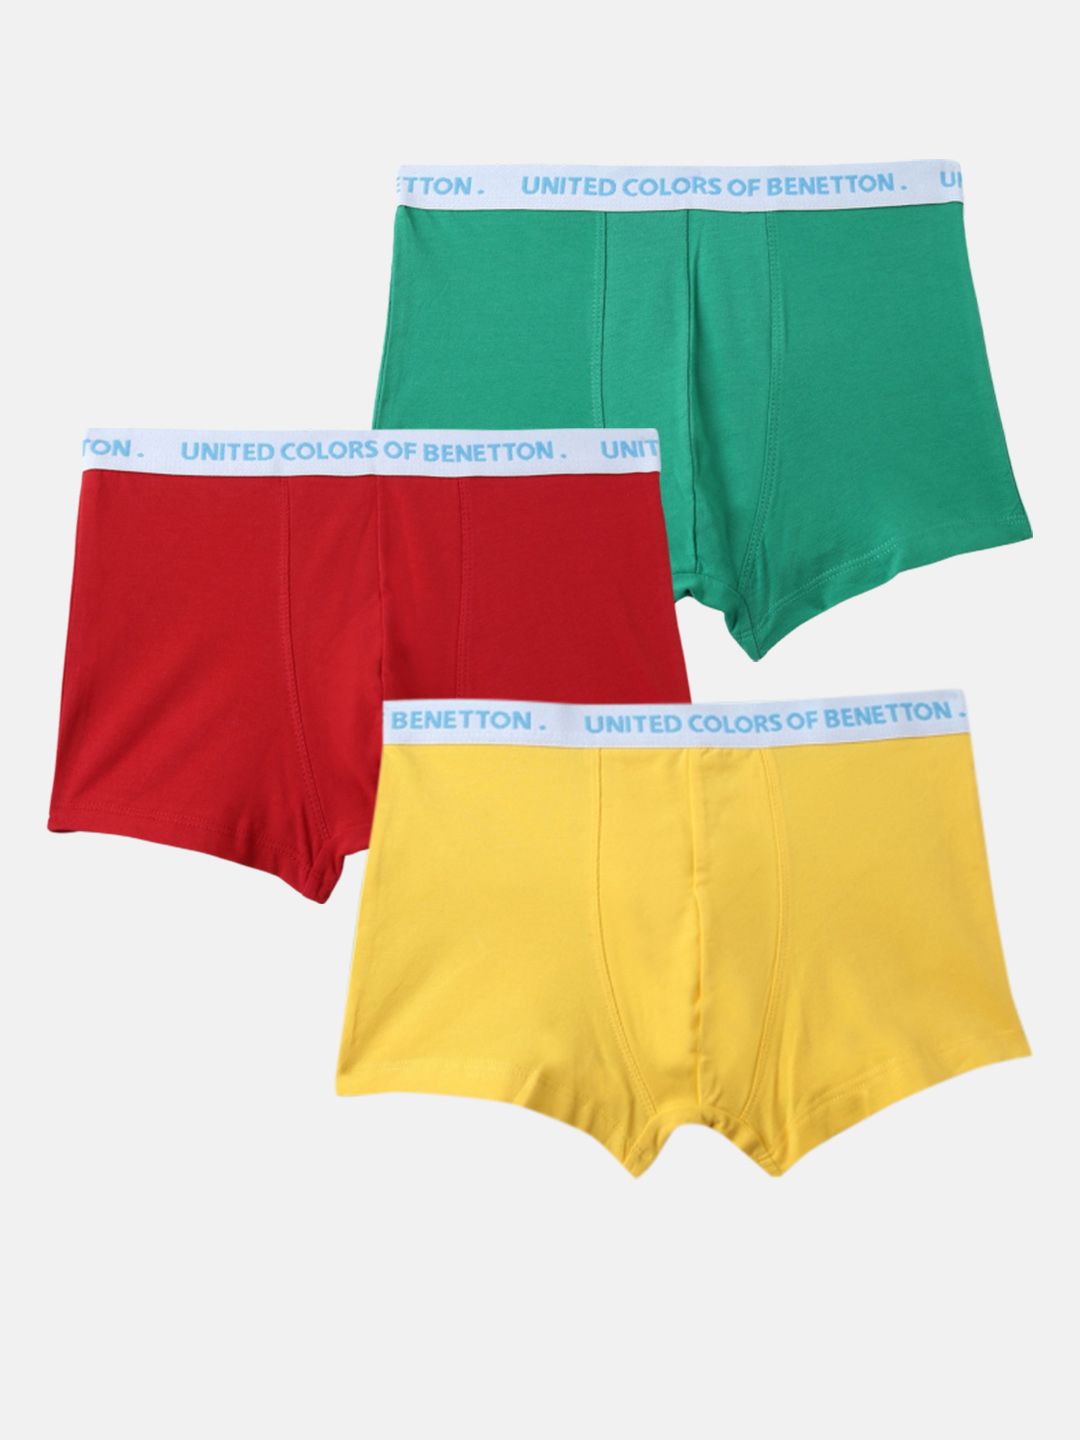 Buy United Colors Of Benetton Solid Colour Low Rise Trunks Black